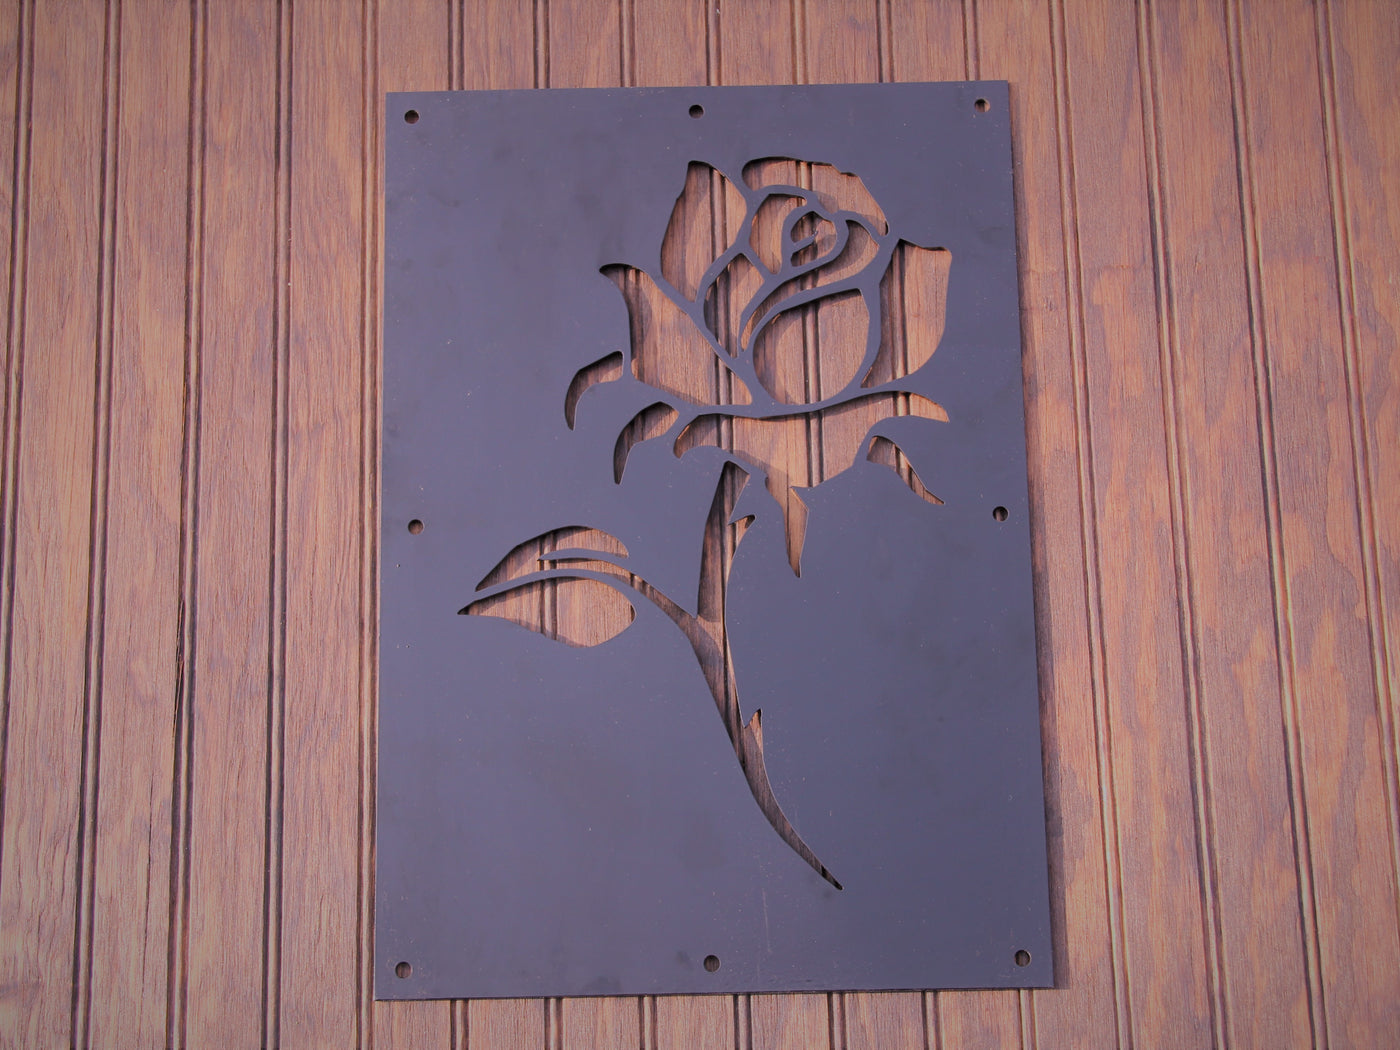 Rose Bud Steel Window Insert for Wood Gate - Madison Iron and Wood - Gate Window - metal outdoor decor - Steel deocrations - american made products - veteran owned business products - fencing decorations - fencing supplies - custom wall decorations - personalized wall signs - steel - decorative post caps - steel post caps - metal post caps - brackets - structural brackets - home improvement - easter - easter decorations - easter gift - easter yard decor